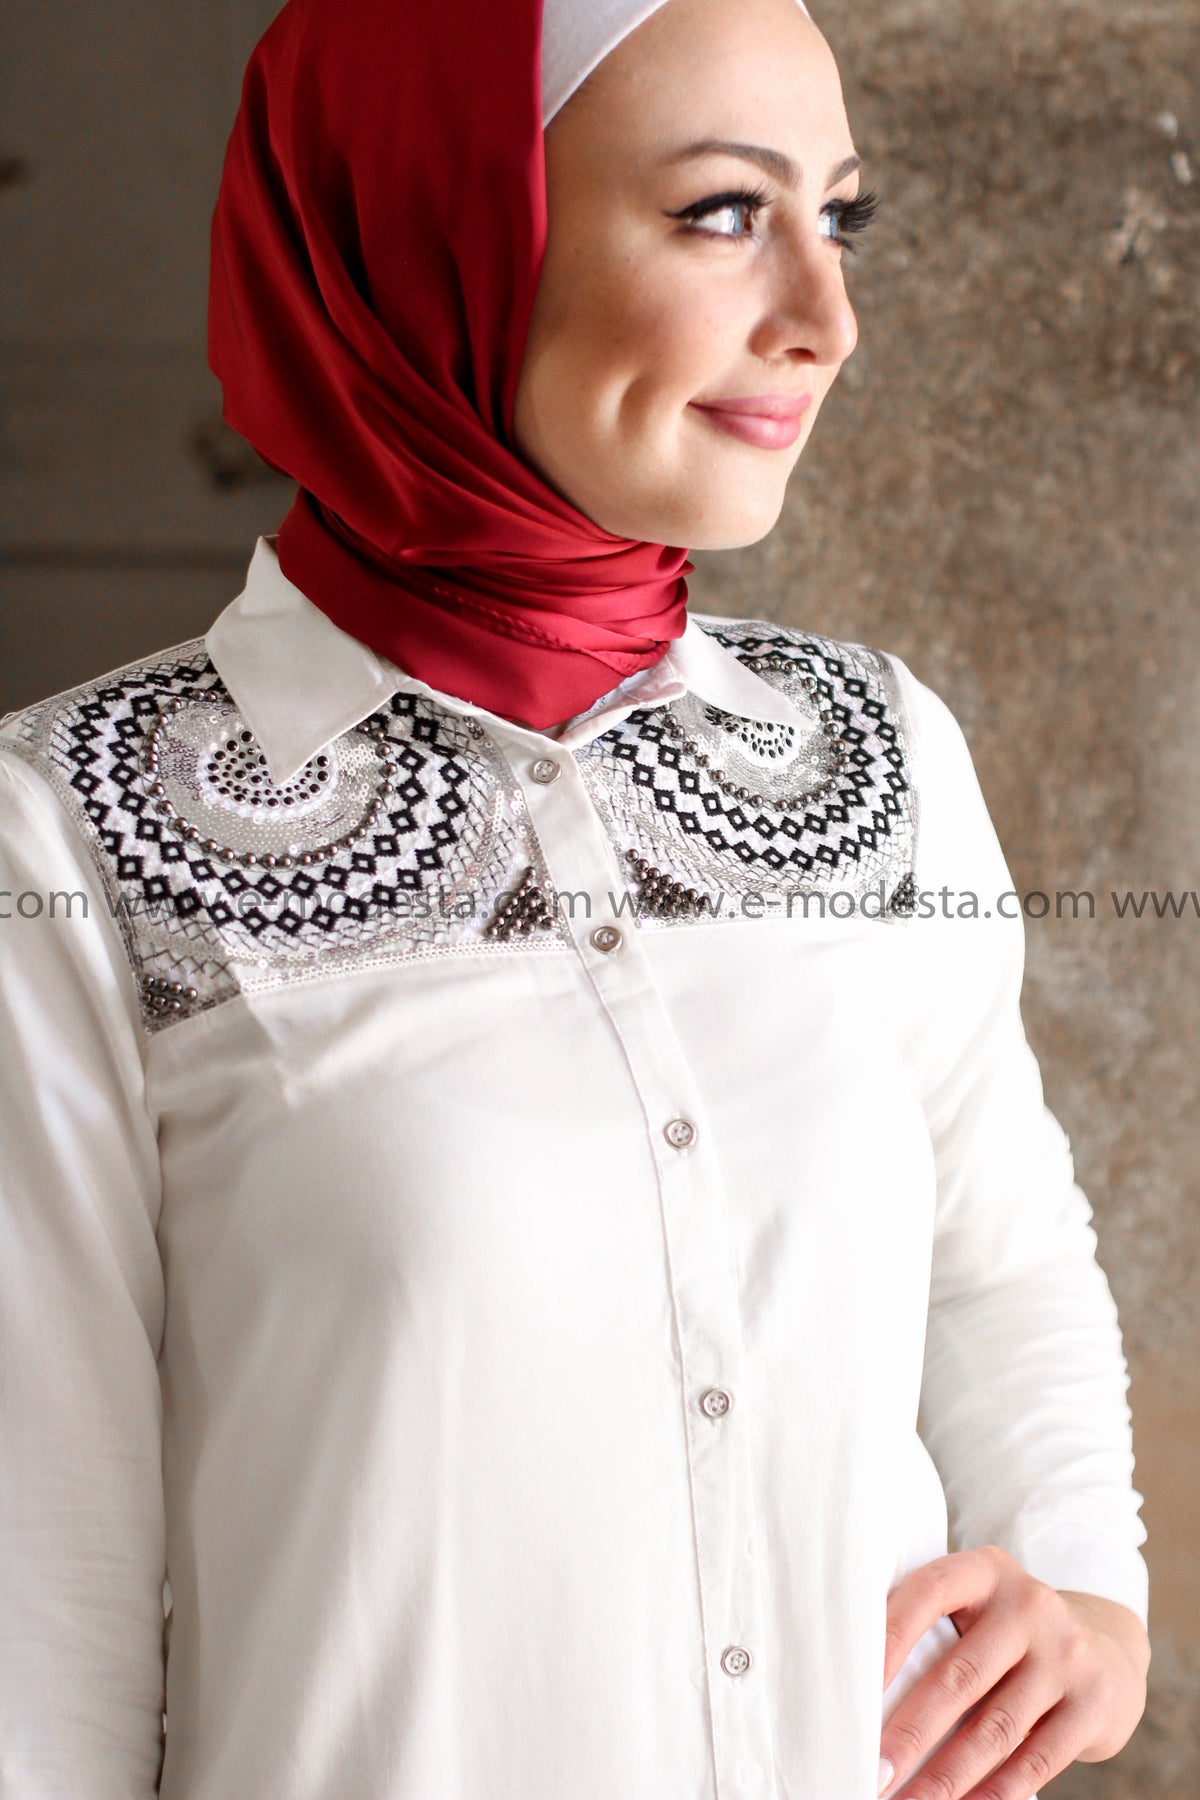 Mid-Length Shirt with Beads and Rhinestone Embroidery - E-Modesta